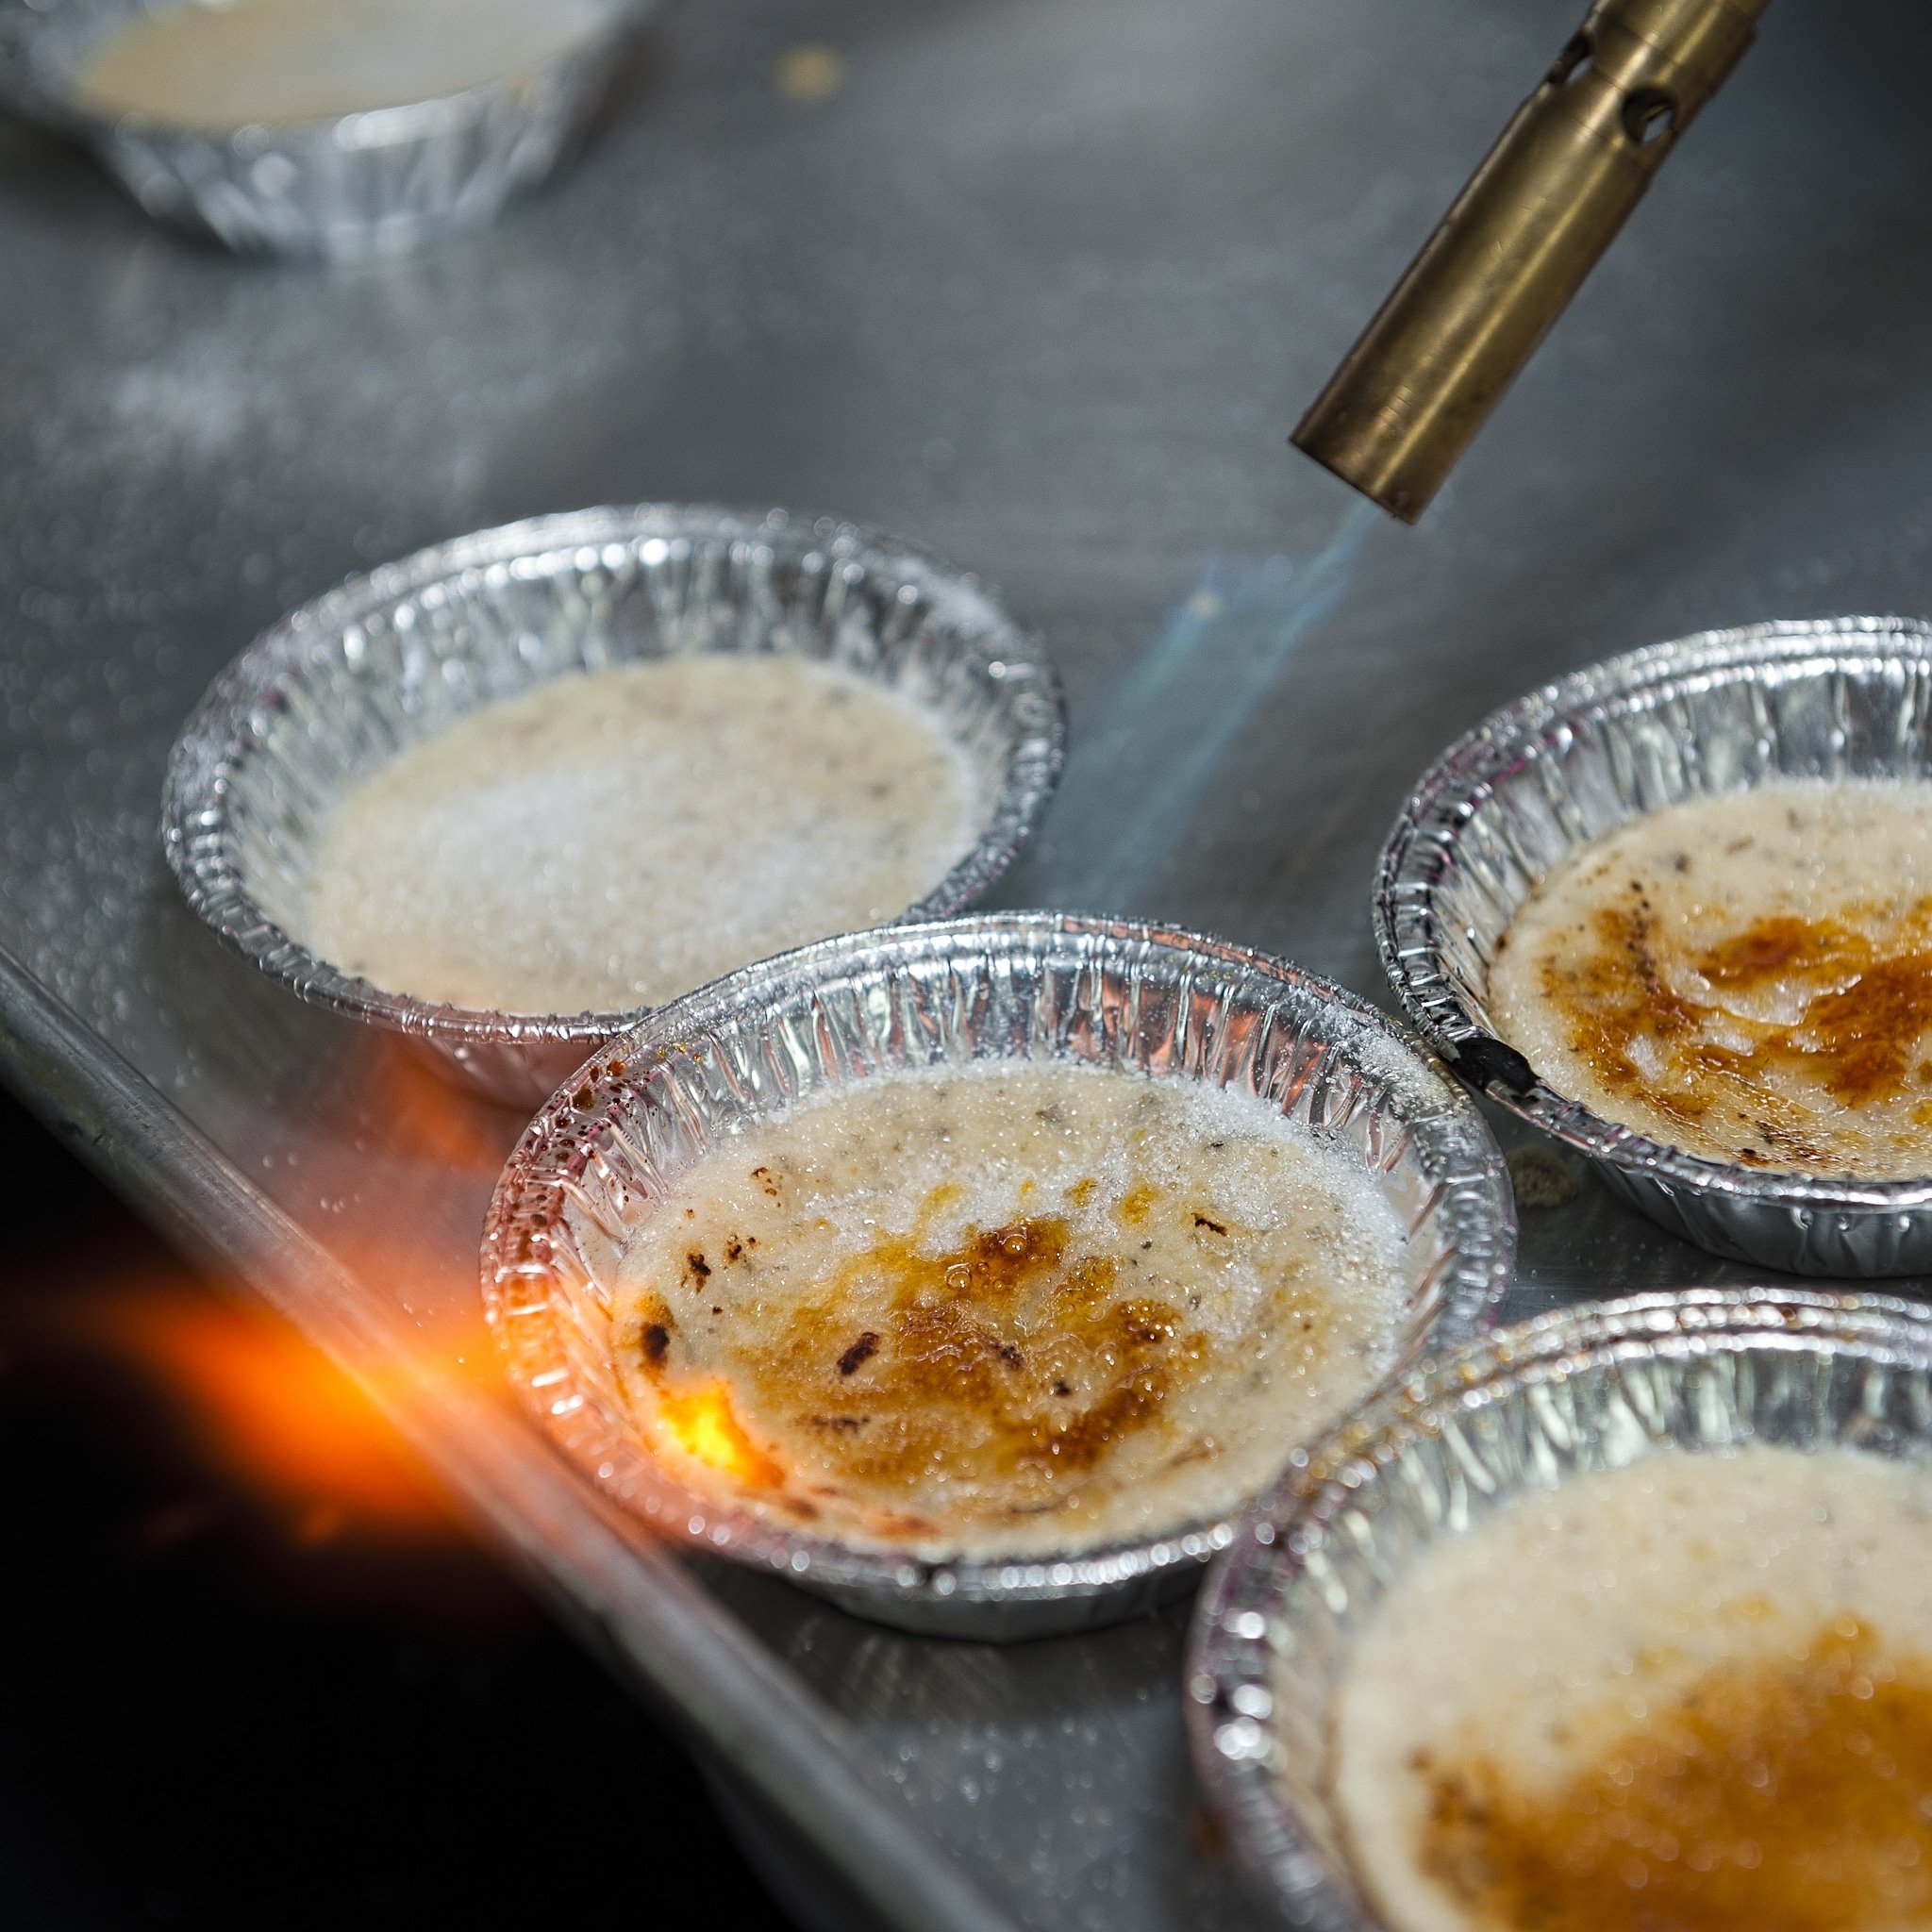 A flame caramelizes the top of sugar on top of a creme brulee.